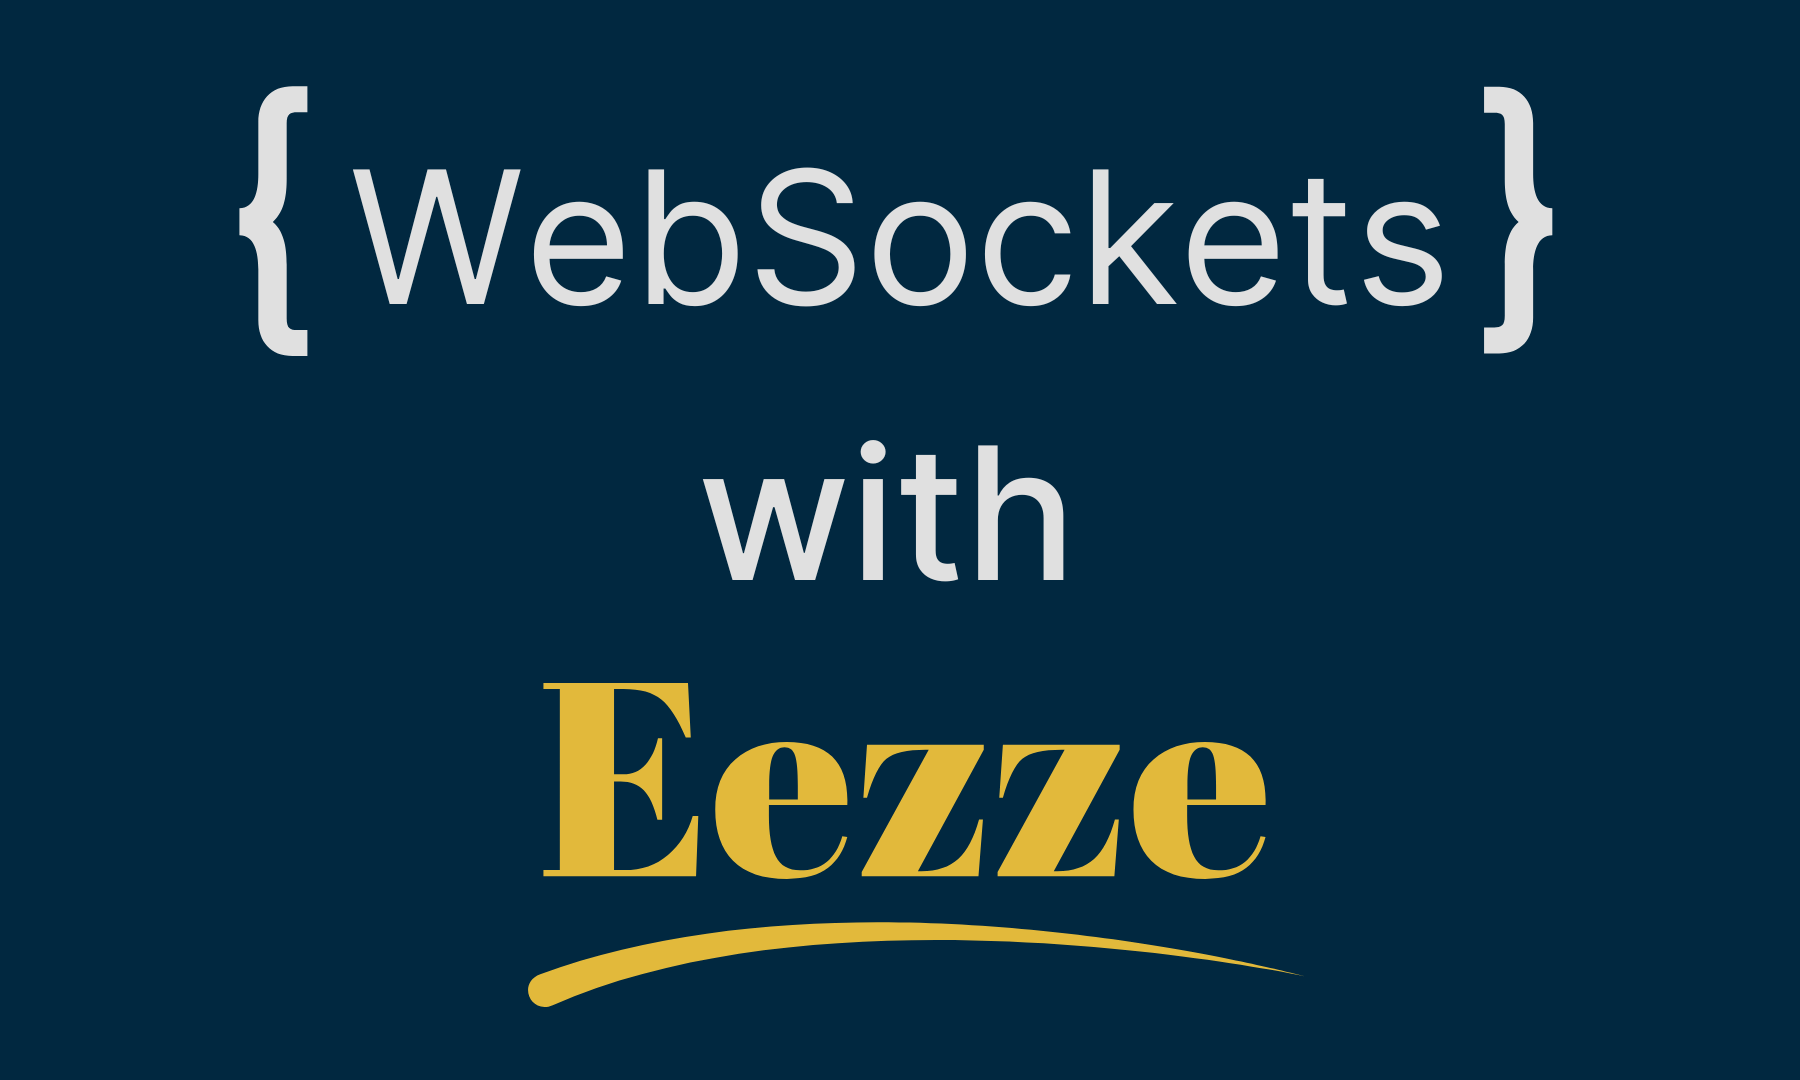 Frustrated by the complexities of implementing real-time features in your applications? Eezze offers a streamlined solution, empowering developers to build responsive, data-driven apps without diving deep into websocket protocols and synchronization code.